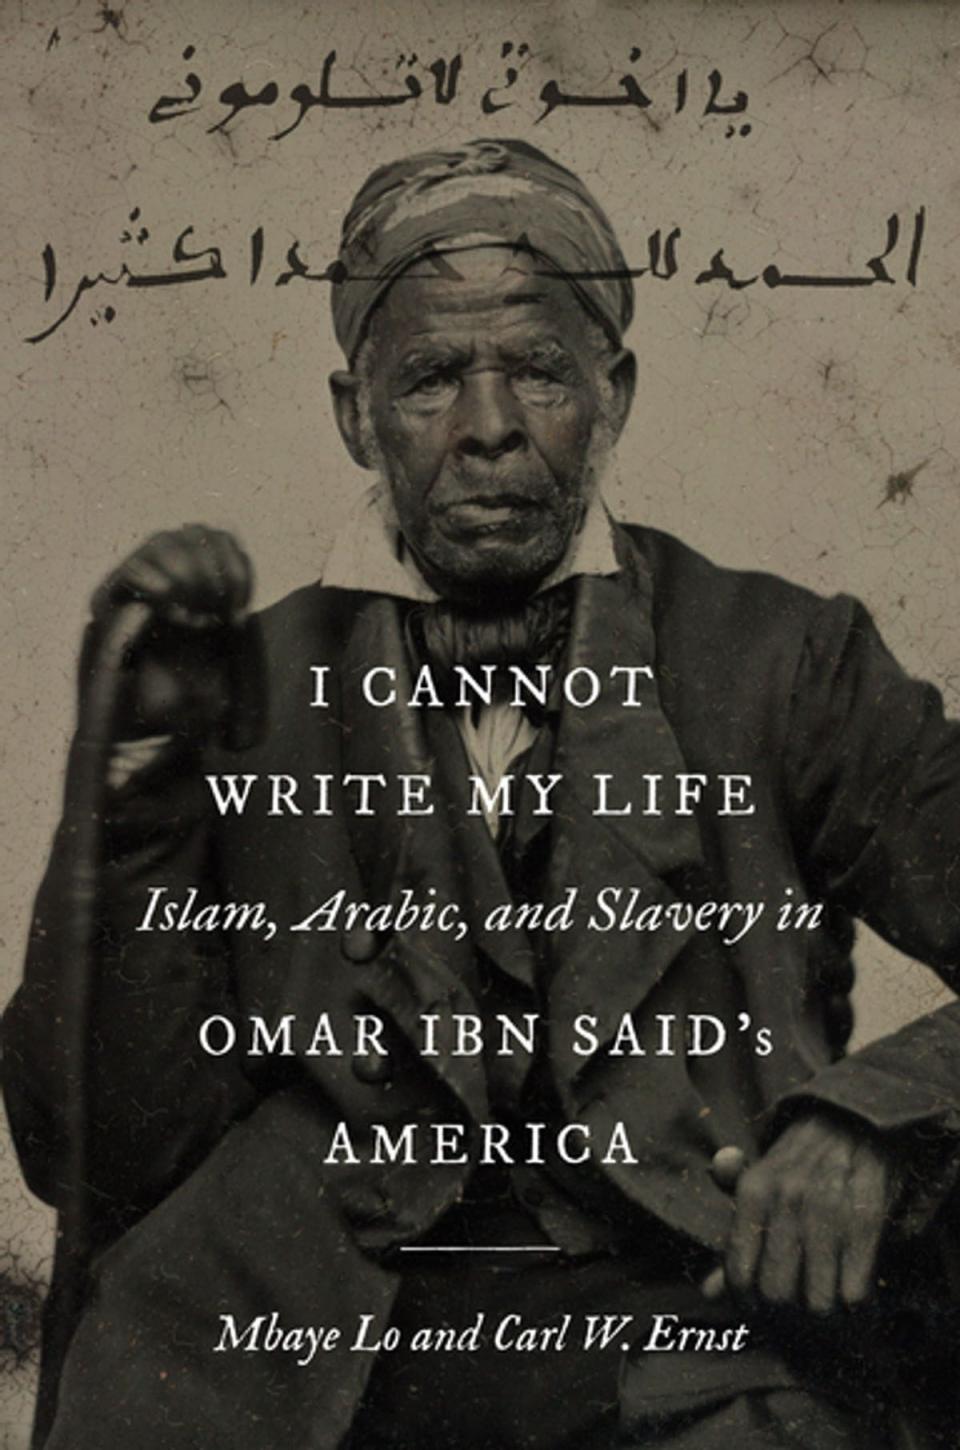 "I Cannot Write My Life: Islam, Arabic and Slavery in Omar ibn Said's America," by Mbaye Lo and Carl W. Ernst, is about an enslaved man who lived for decades in Wilmington.